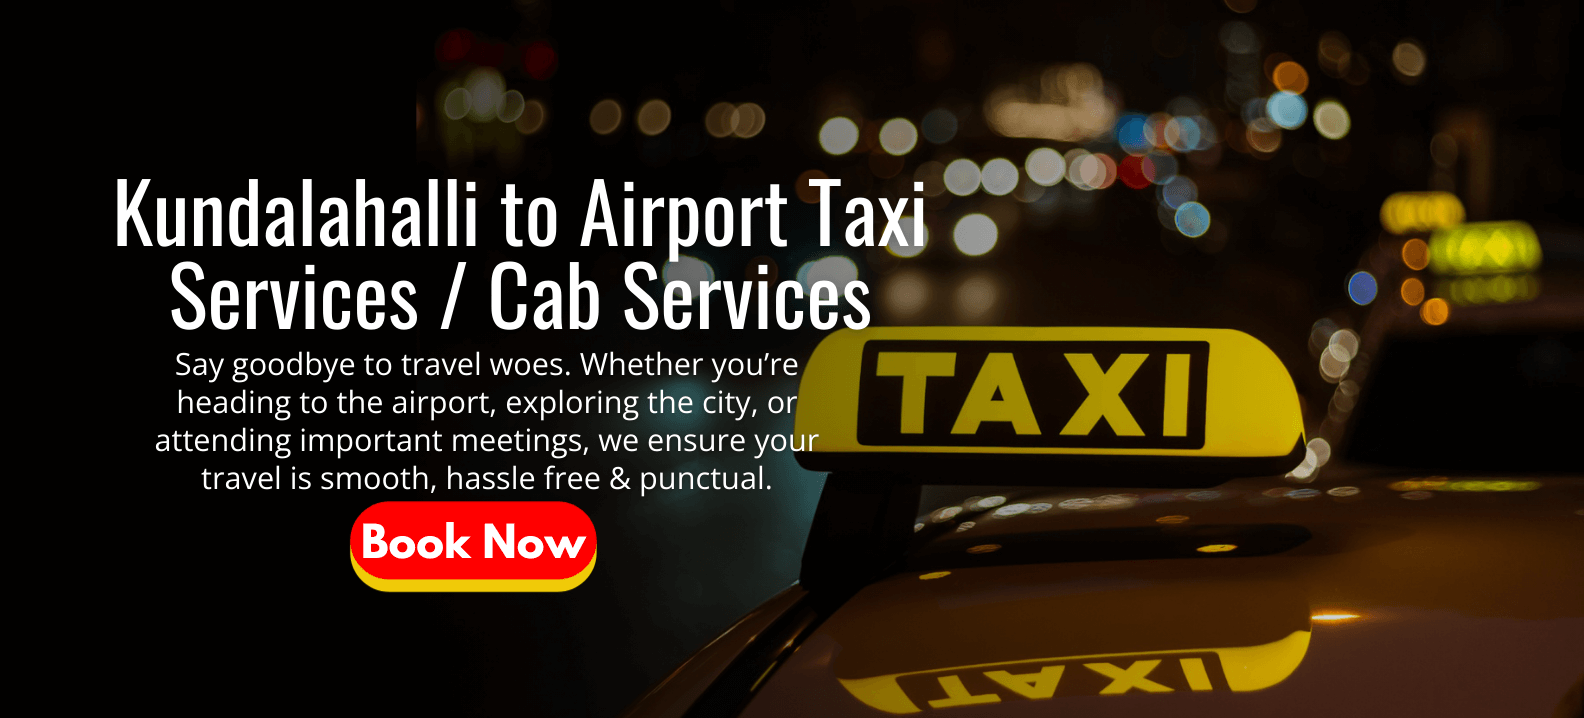 Kundalahalli to Airport Taxi Services Cab Services